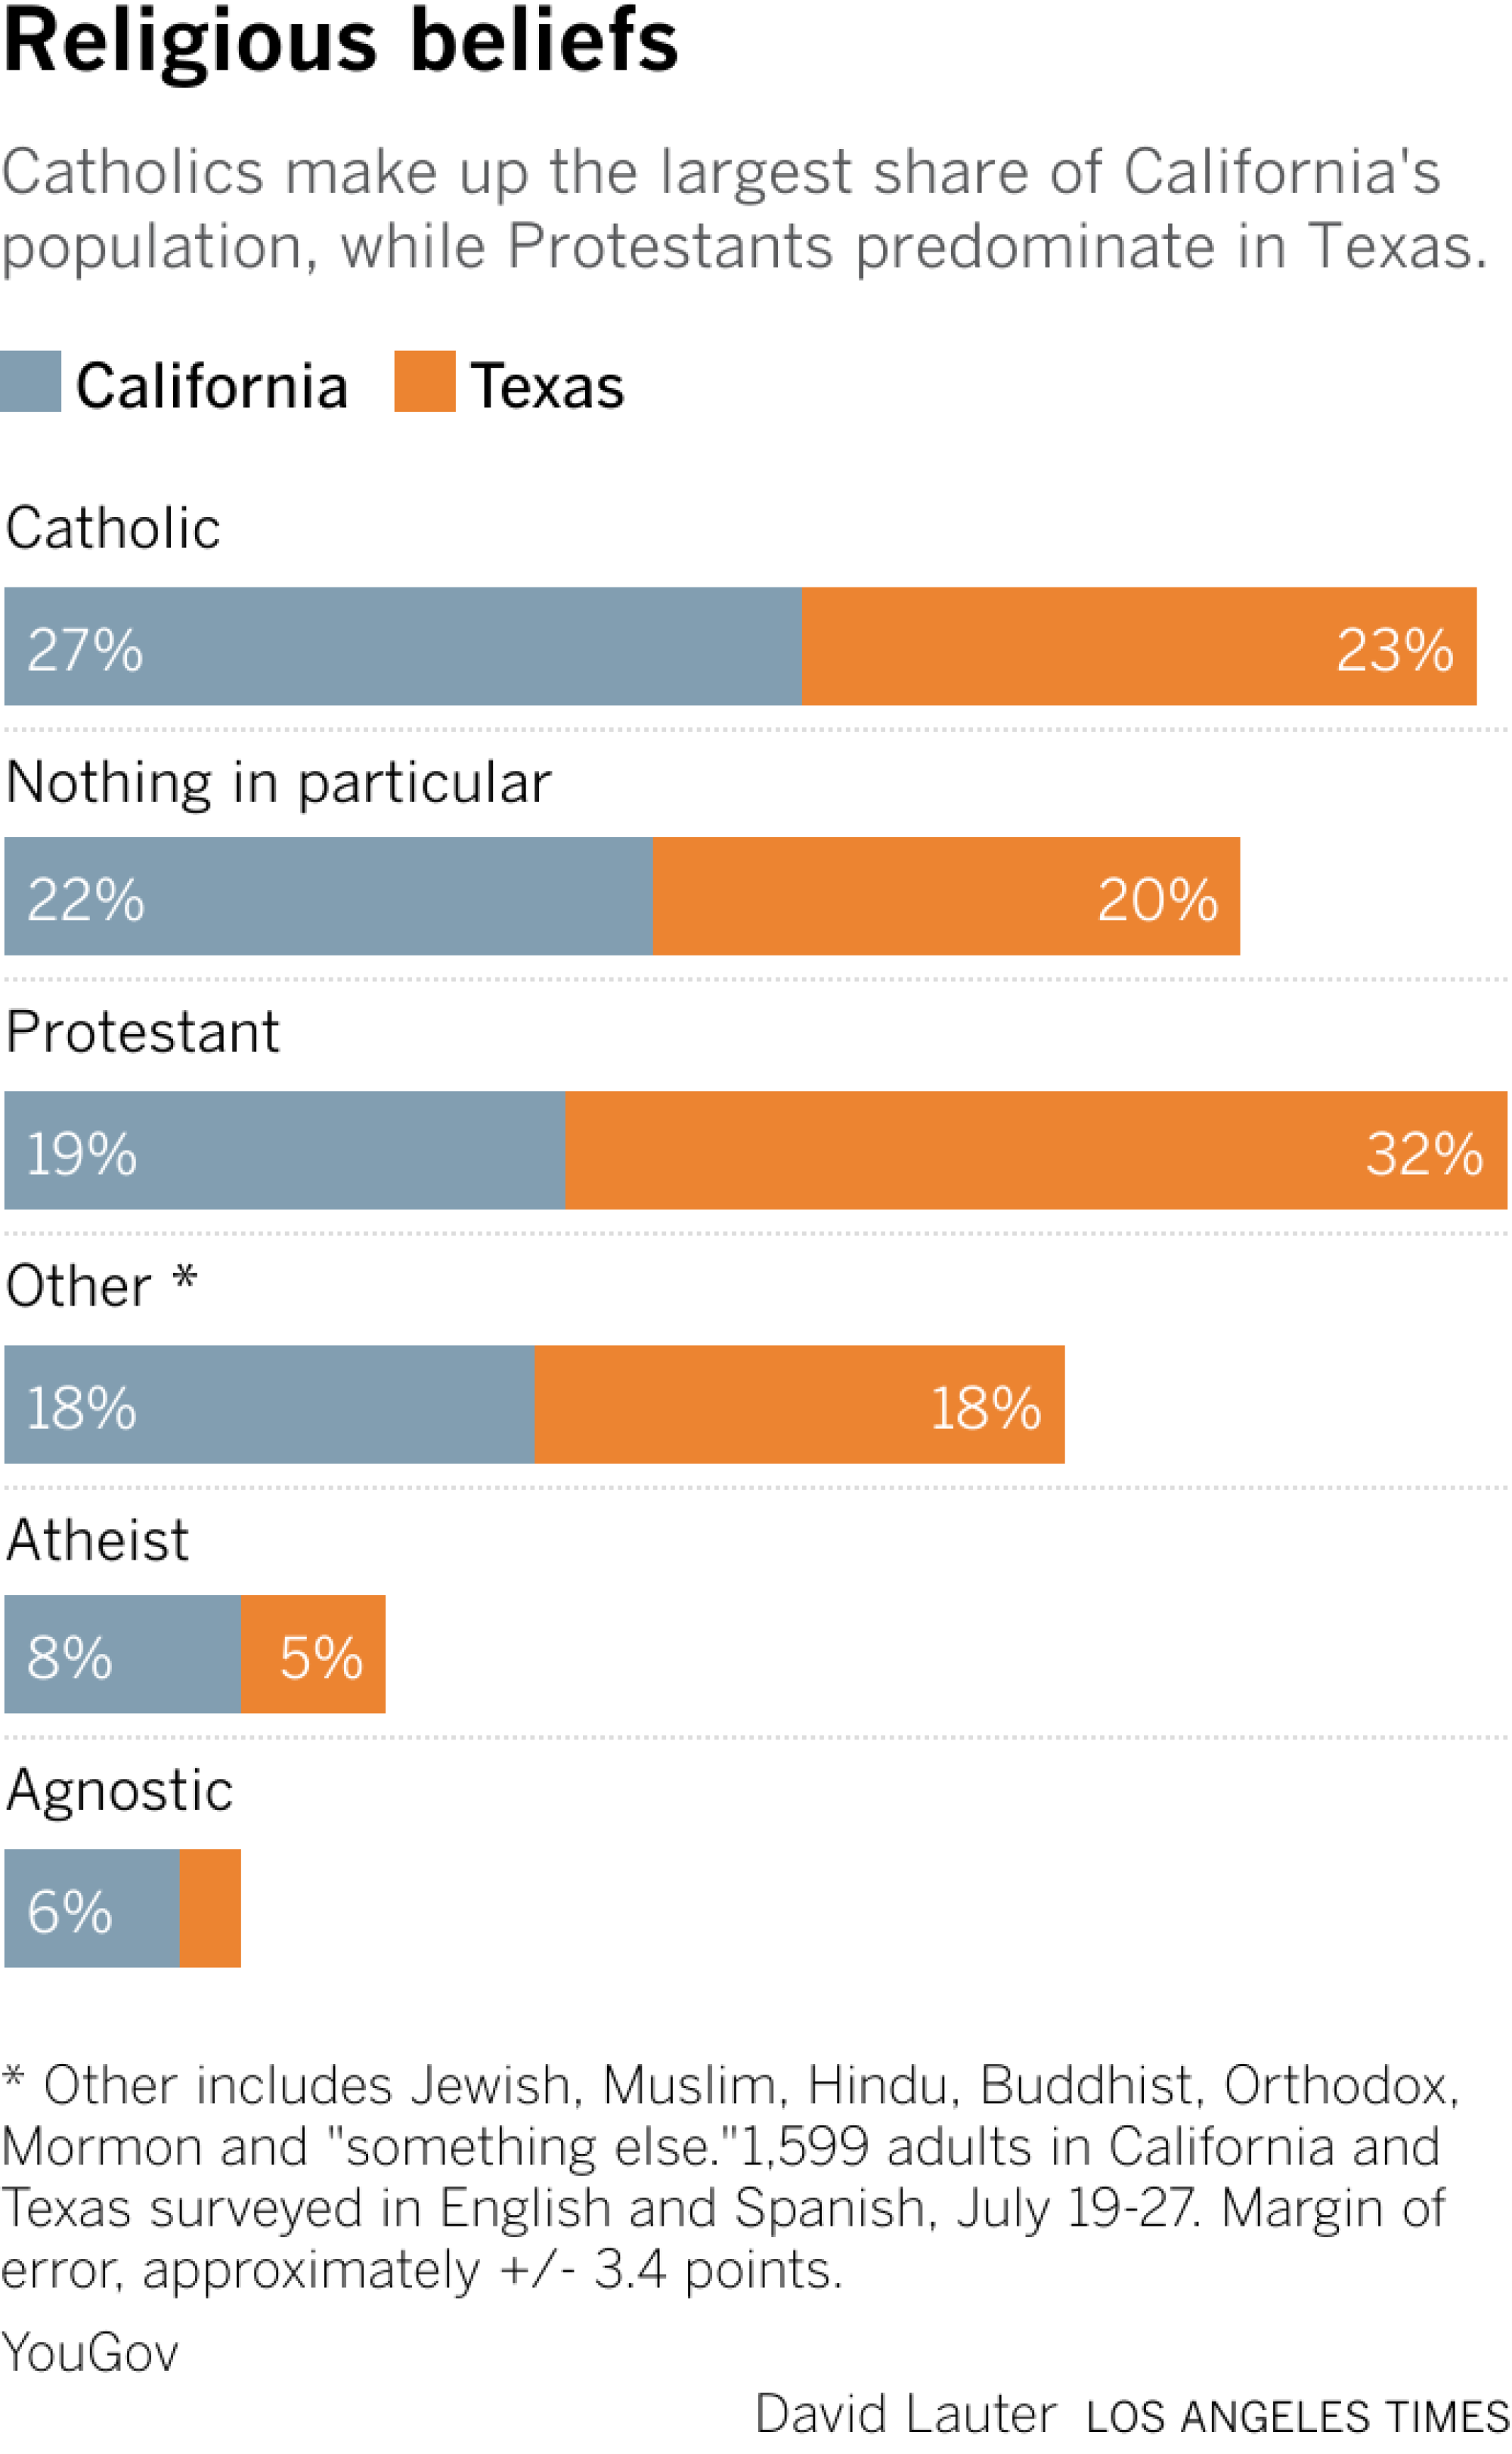 Catholics make up the largest share of California's population, while Protestants predominate in Texas.